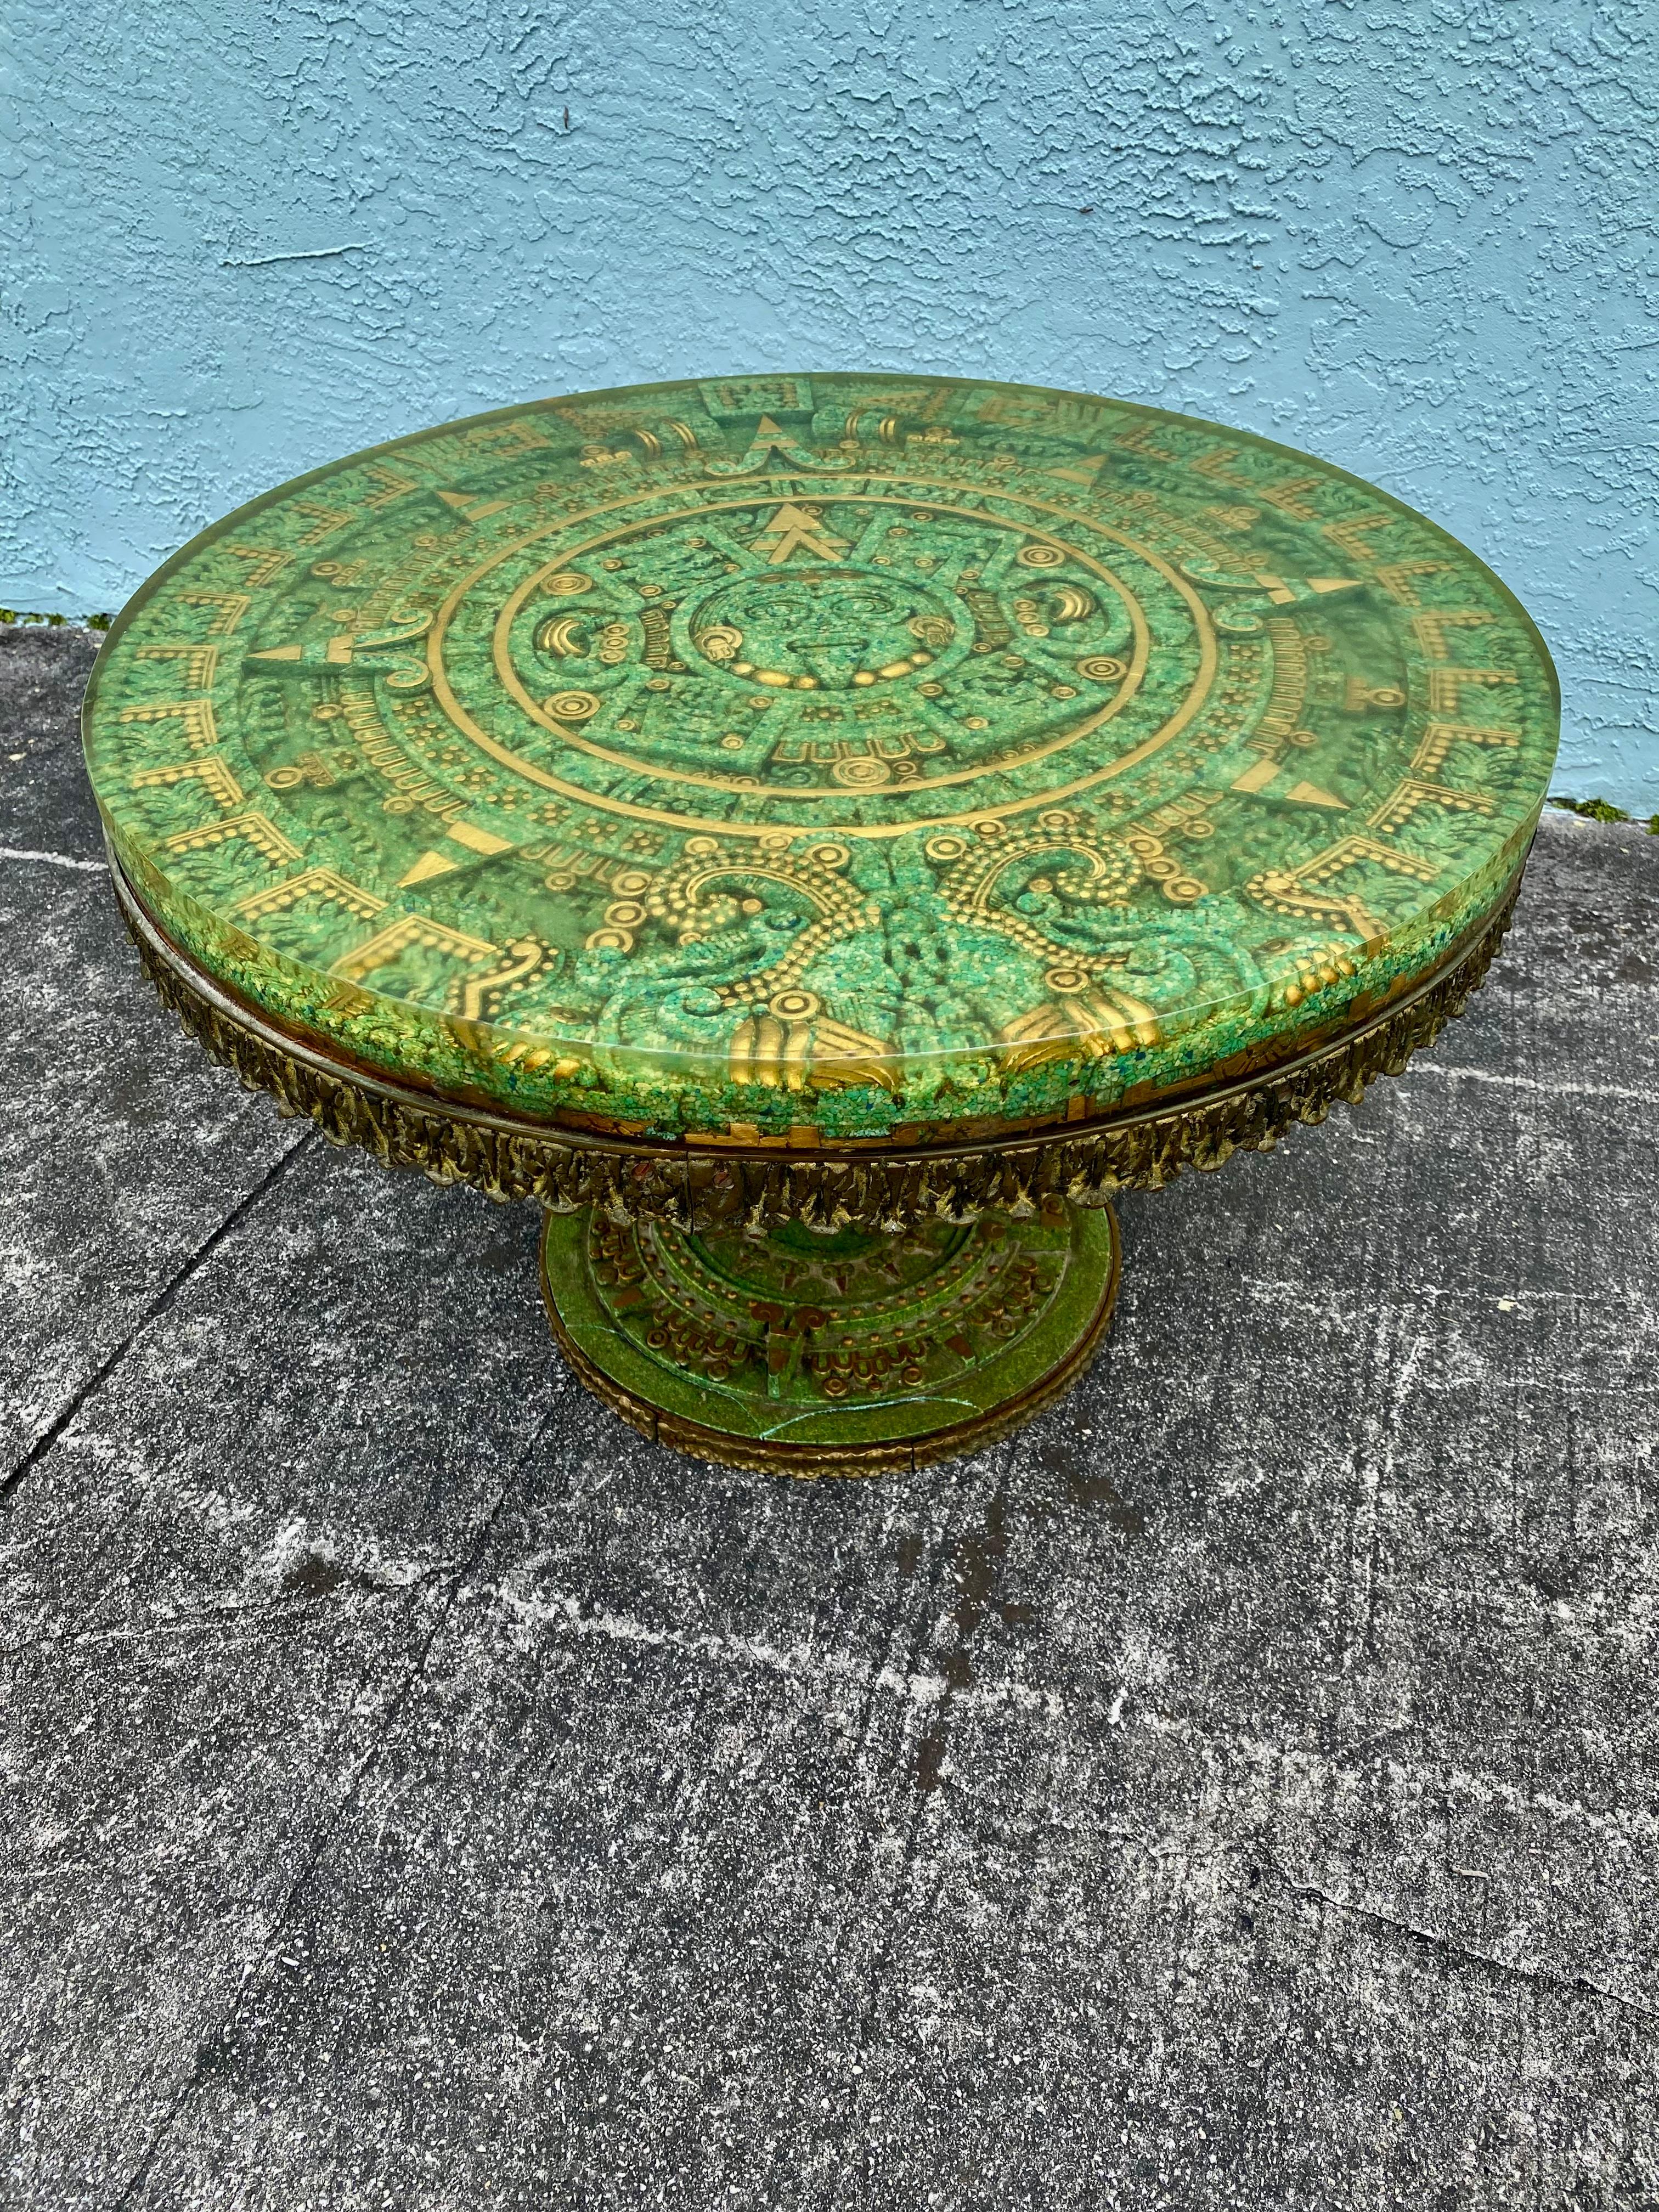 Sculpted Inlay Malachite Brutalist Bronze Wood Stone Resin Aztec Circular Table  In Good Condition For Sale In Fort Lauderdale, FL